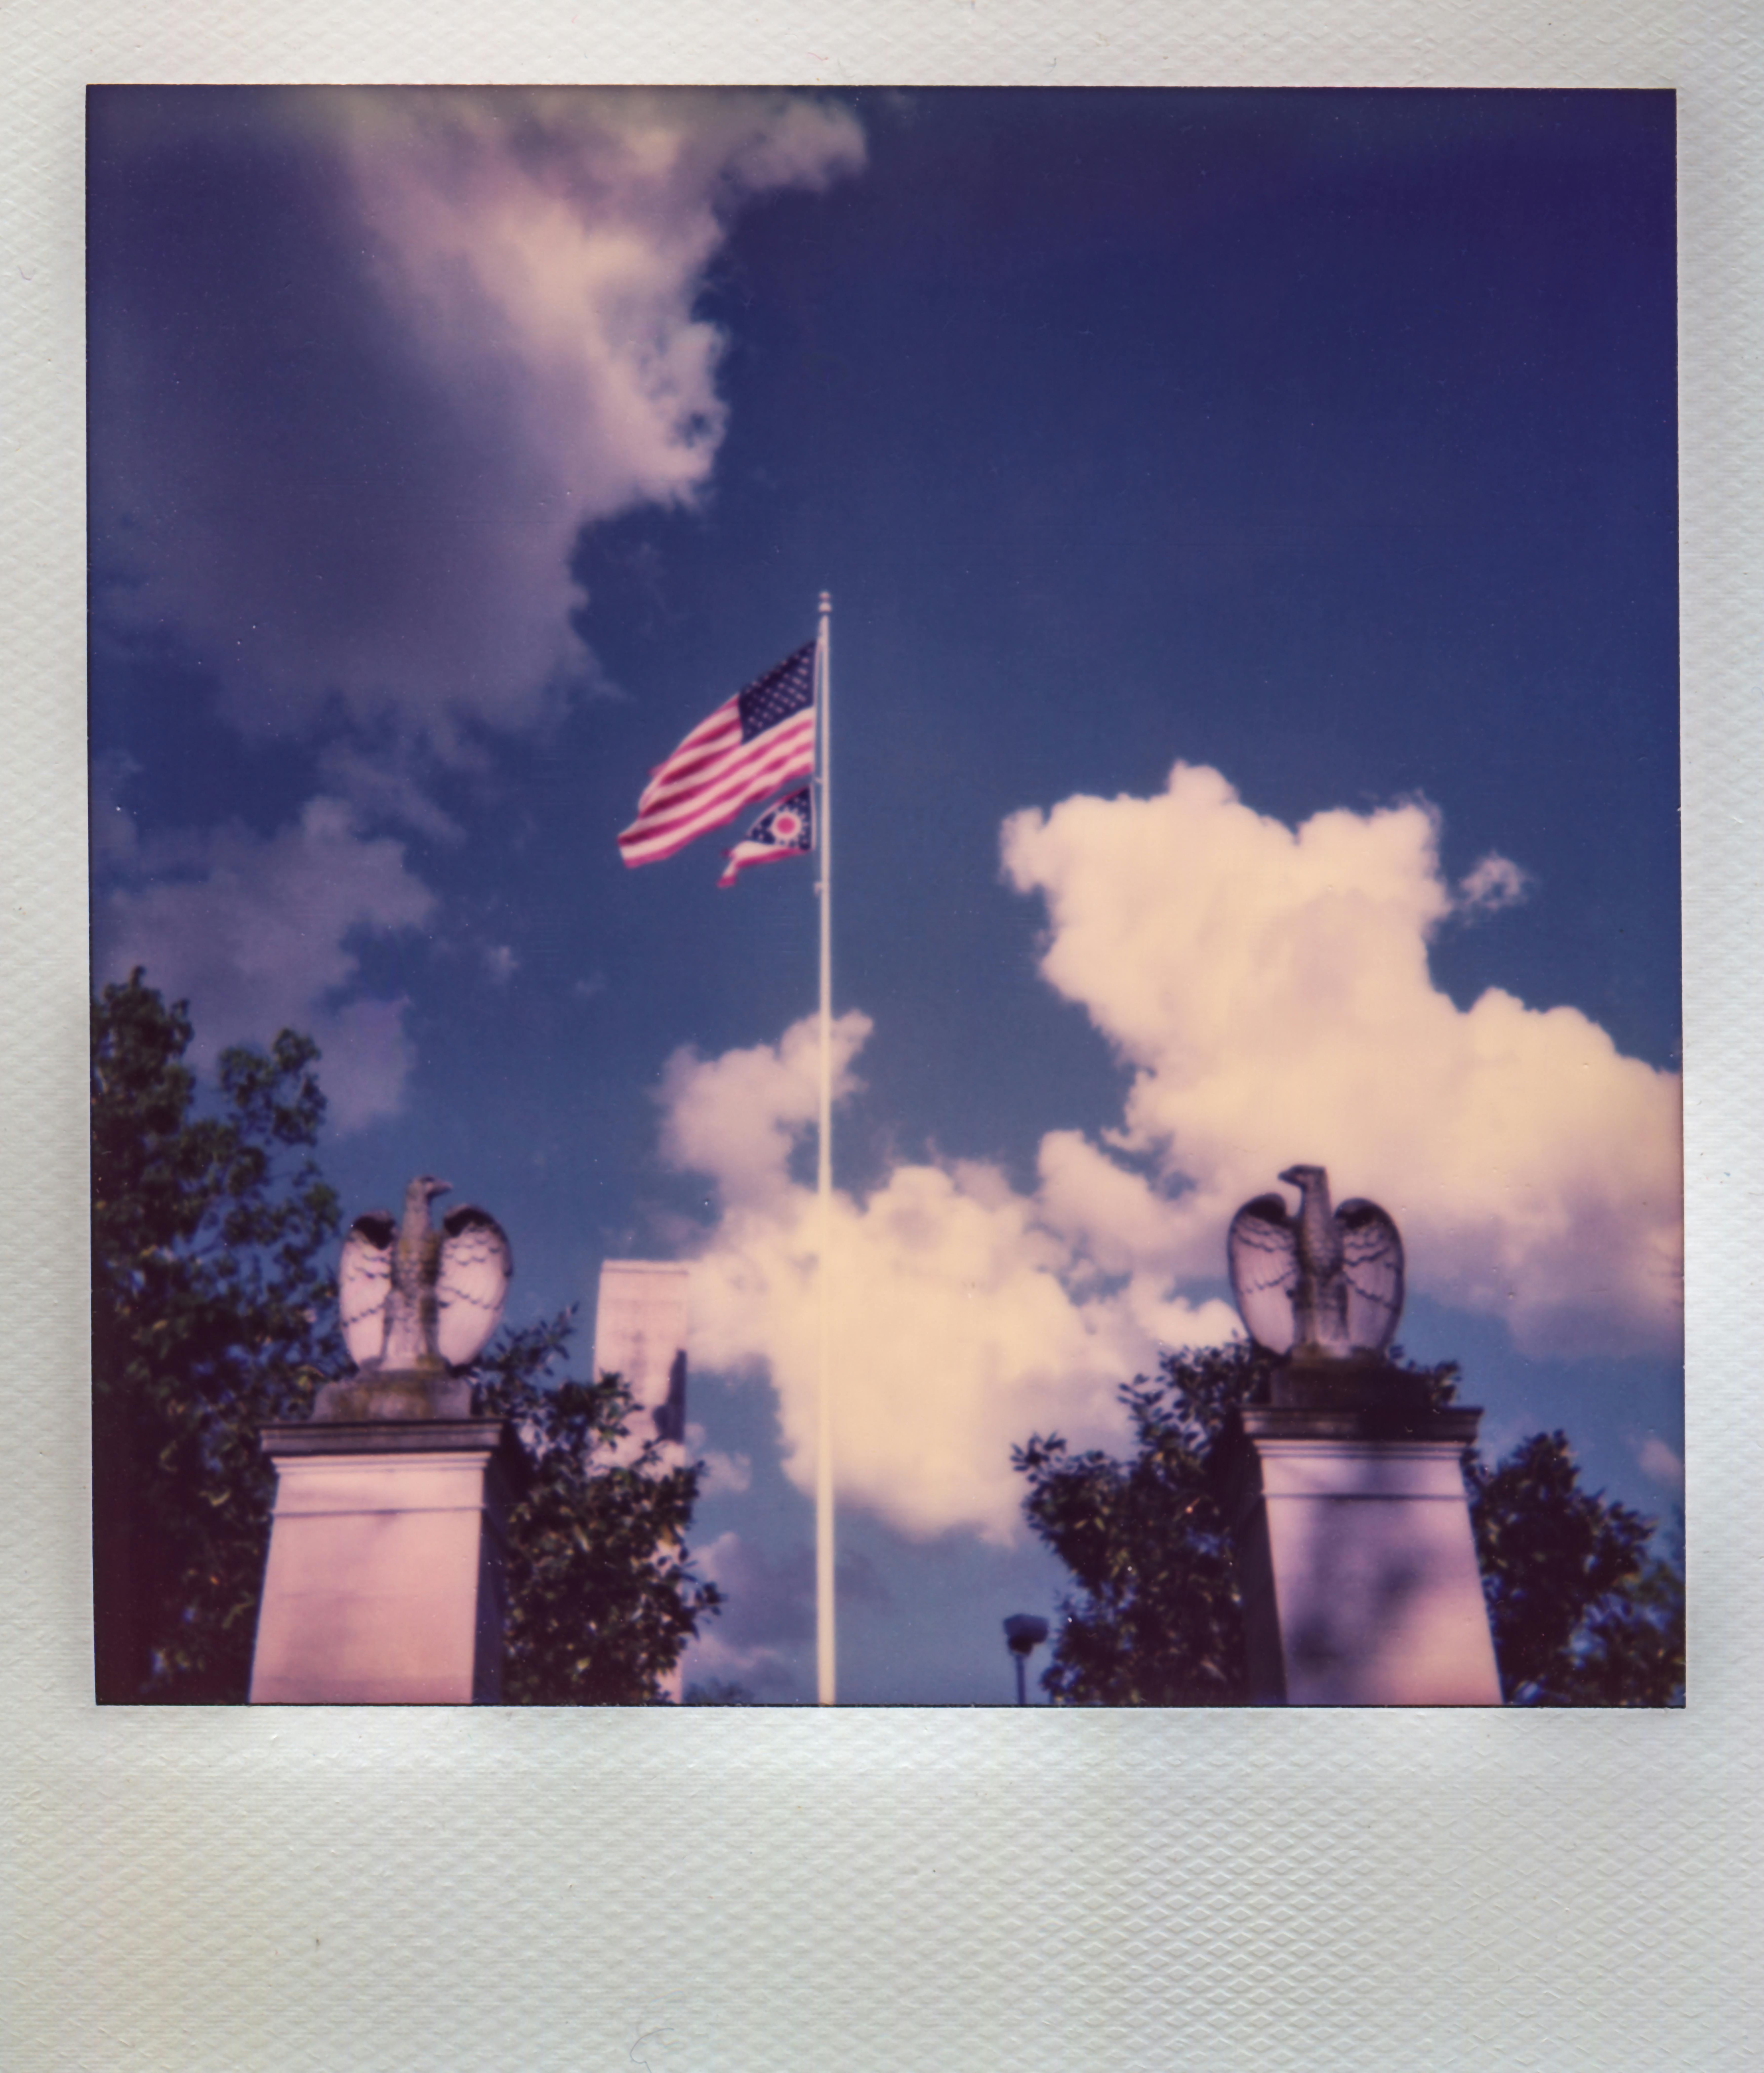 american flag flying on pole between two eagle statues